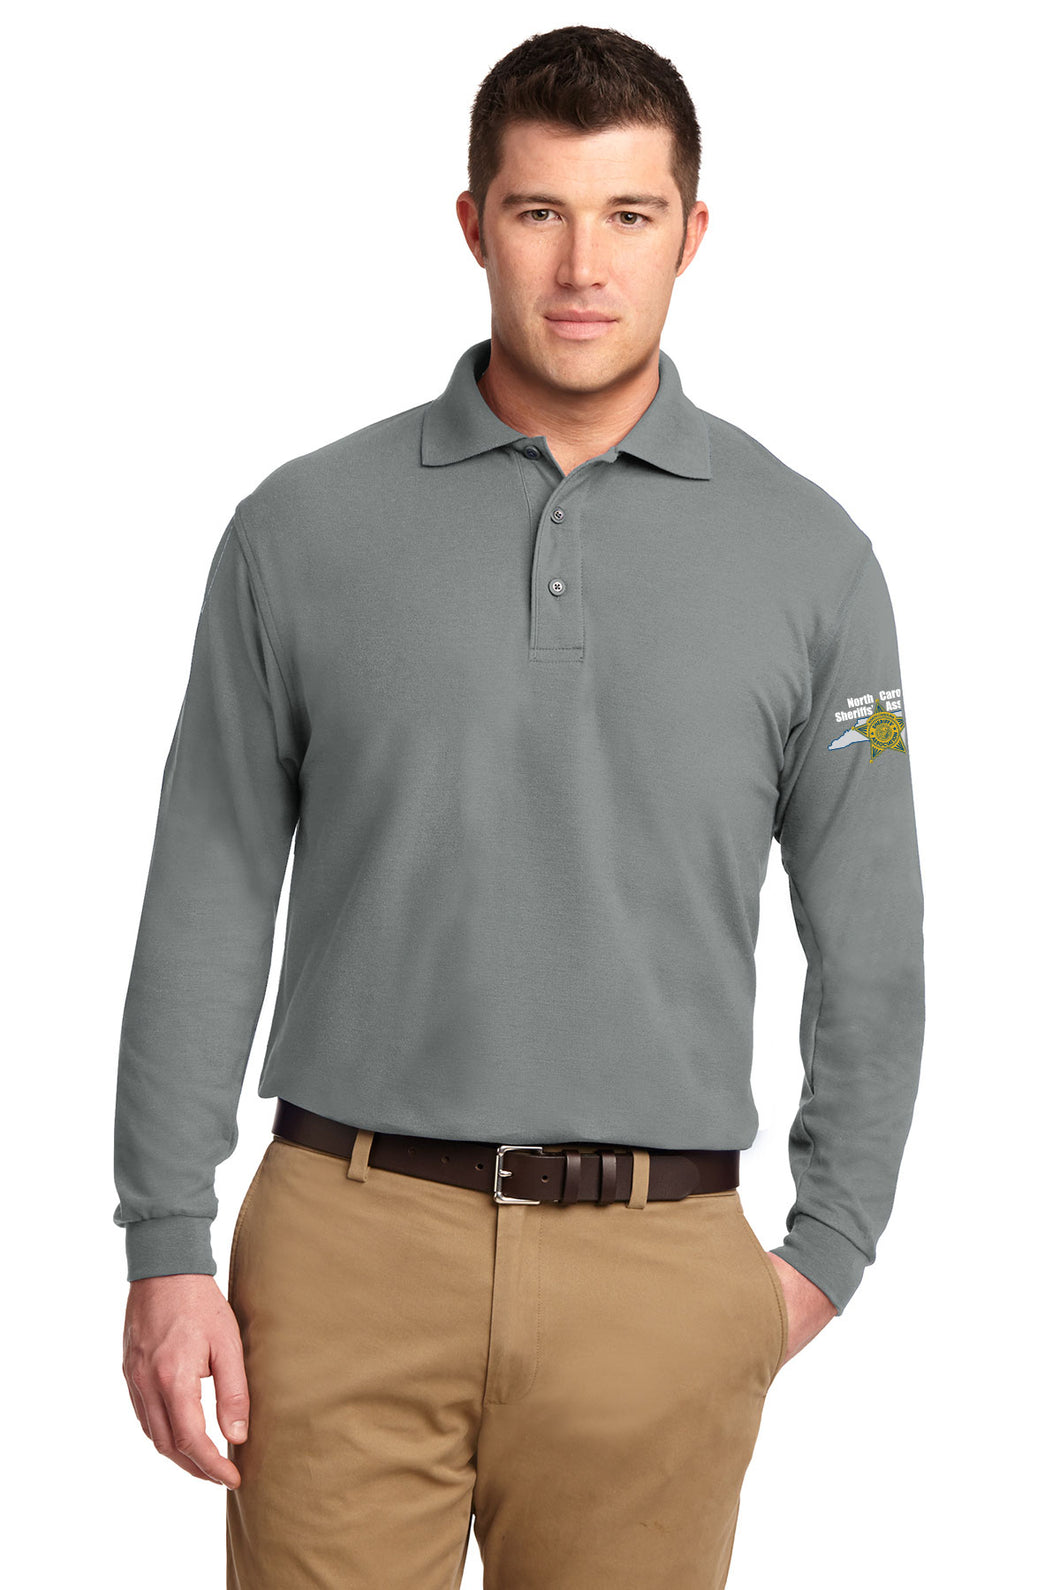 Men's Port Authority Silk Touch Performance Long Sleeve Polo - Cool Grey